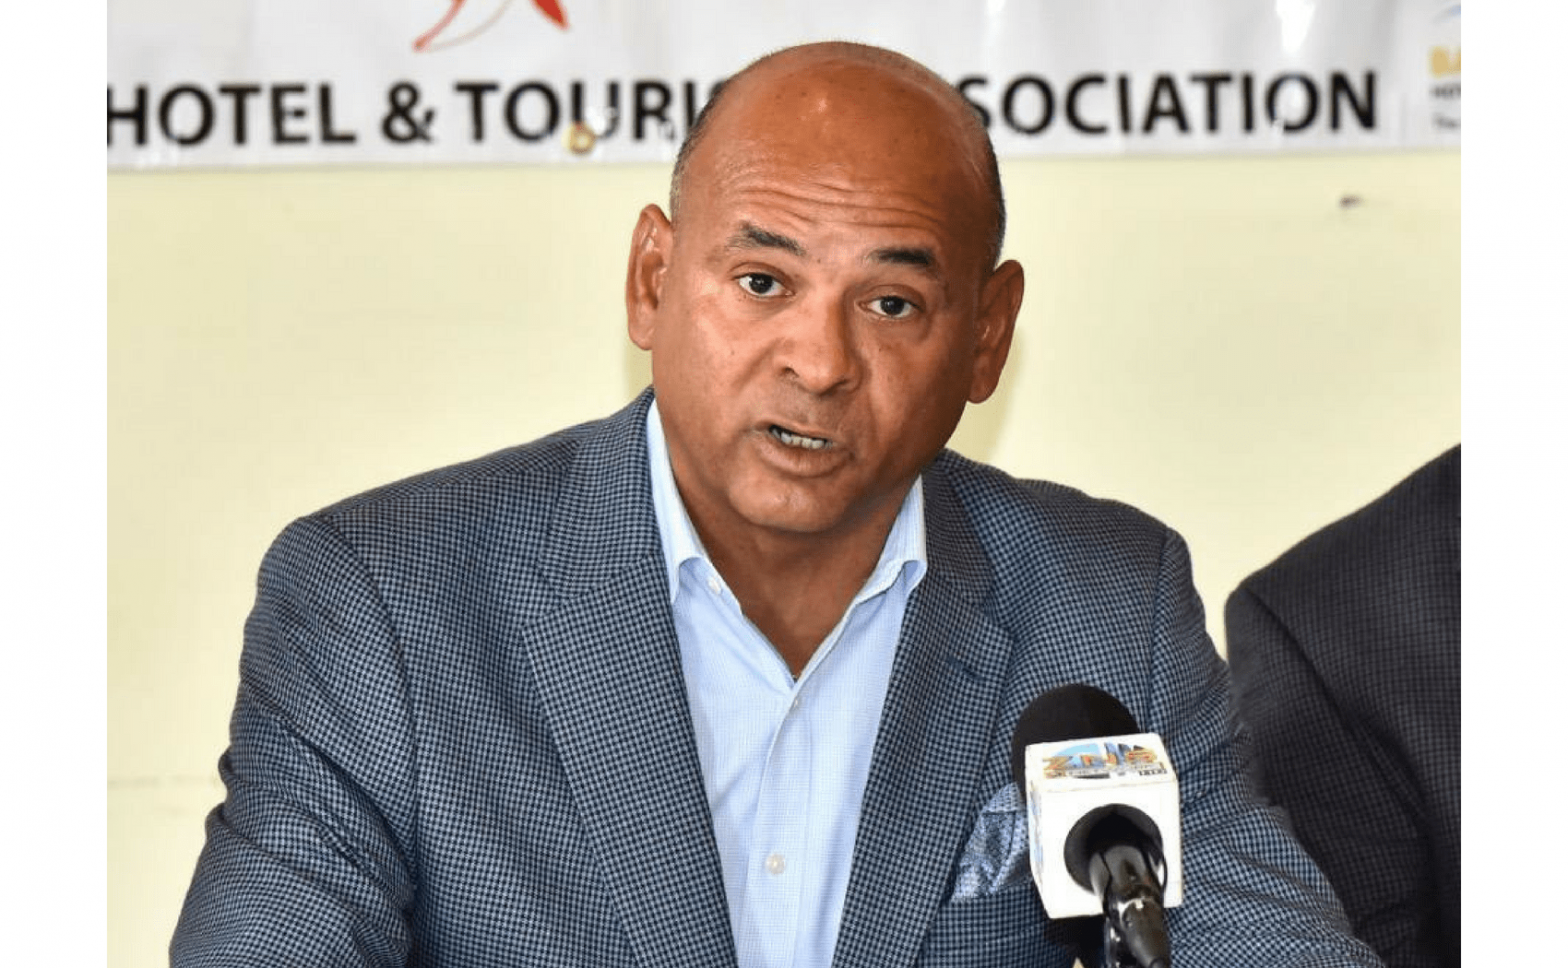 BHTA:  Occupancy levels for Nassau hotels ‘slightly off pace’